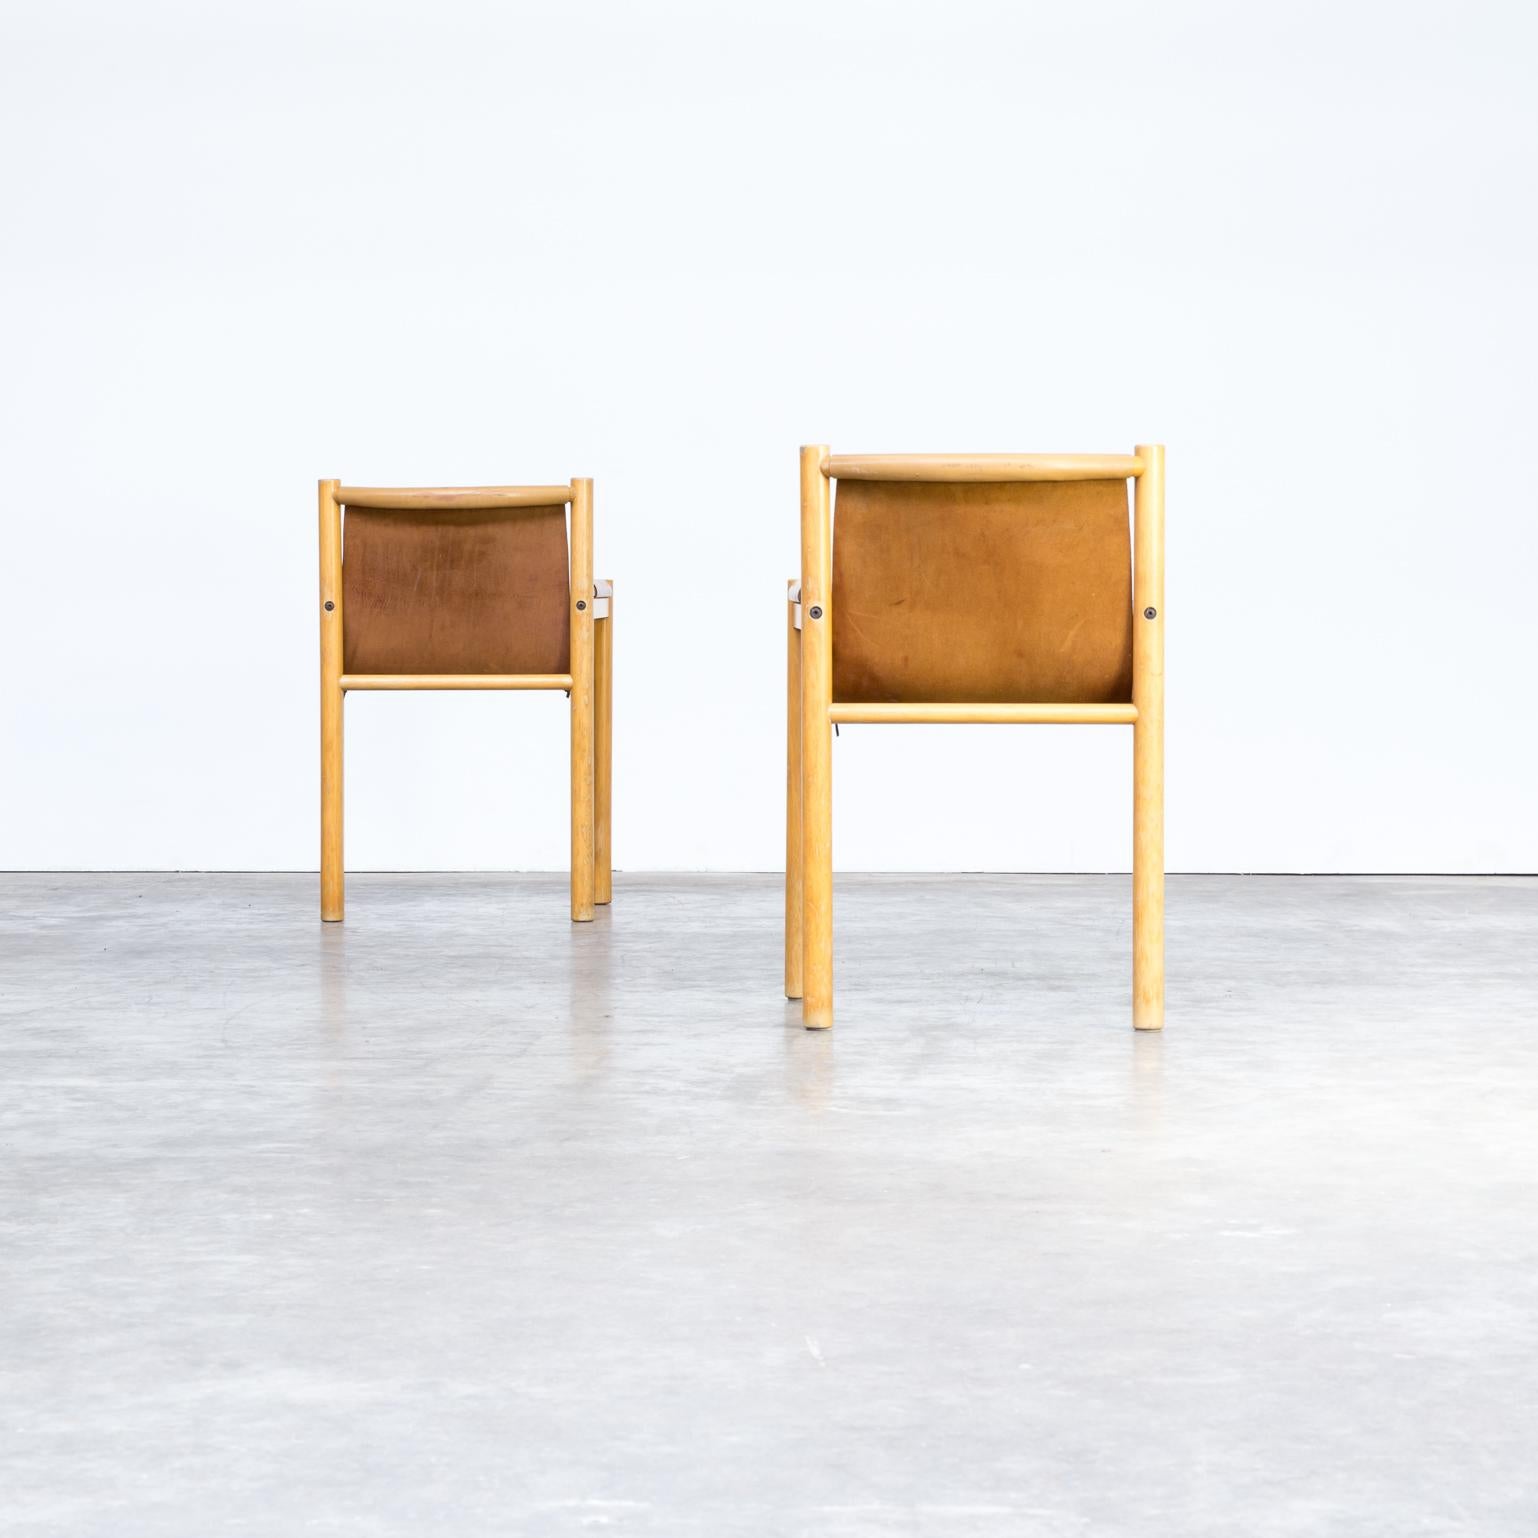 Pair of Camel Brown Leather and wood Dining Chair for Ibisco Sedie set/2, 1970s For Sale 2